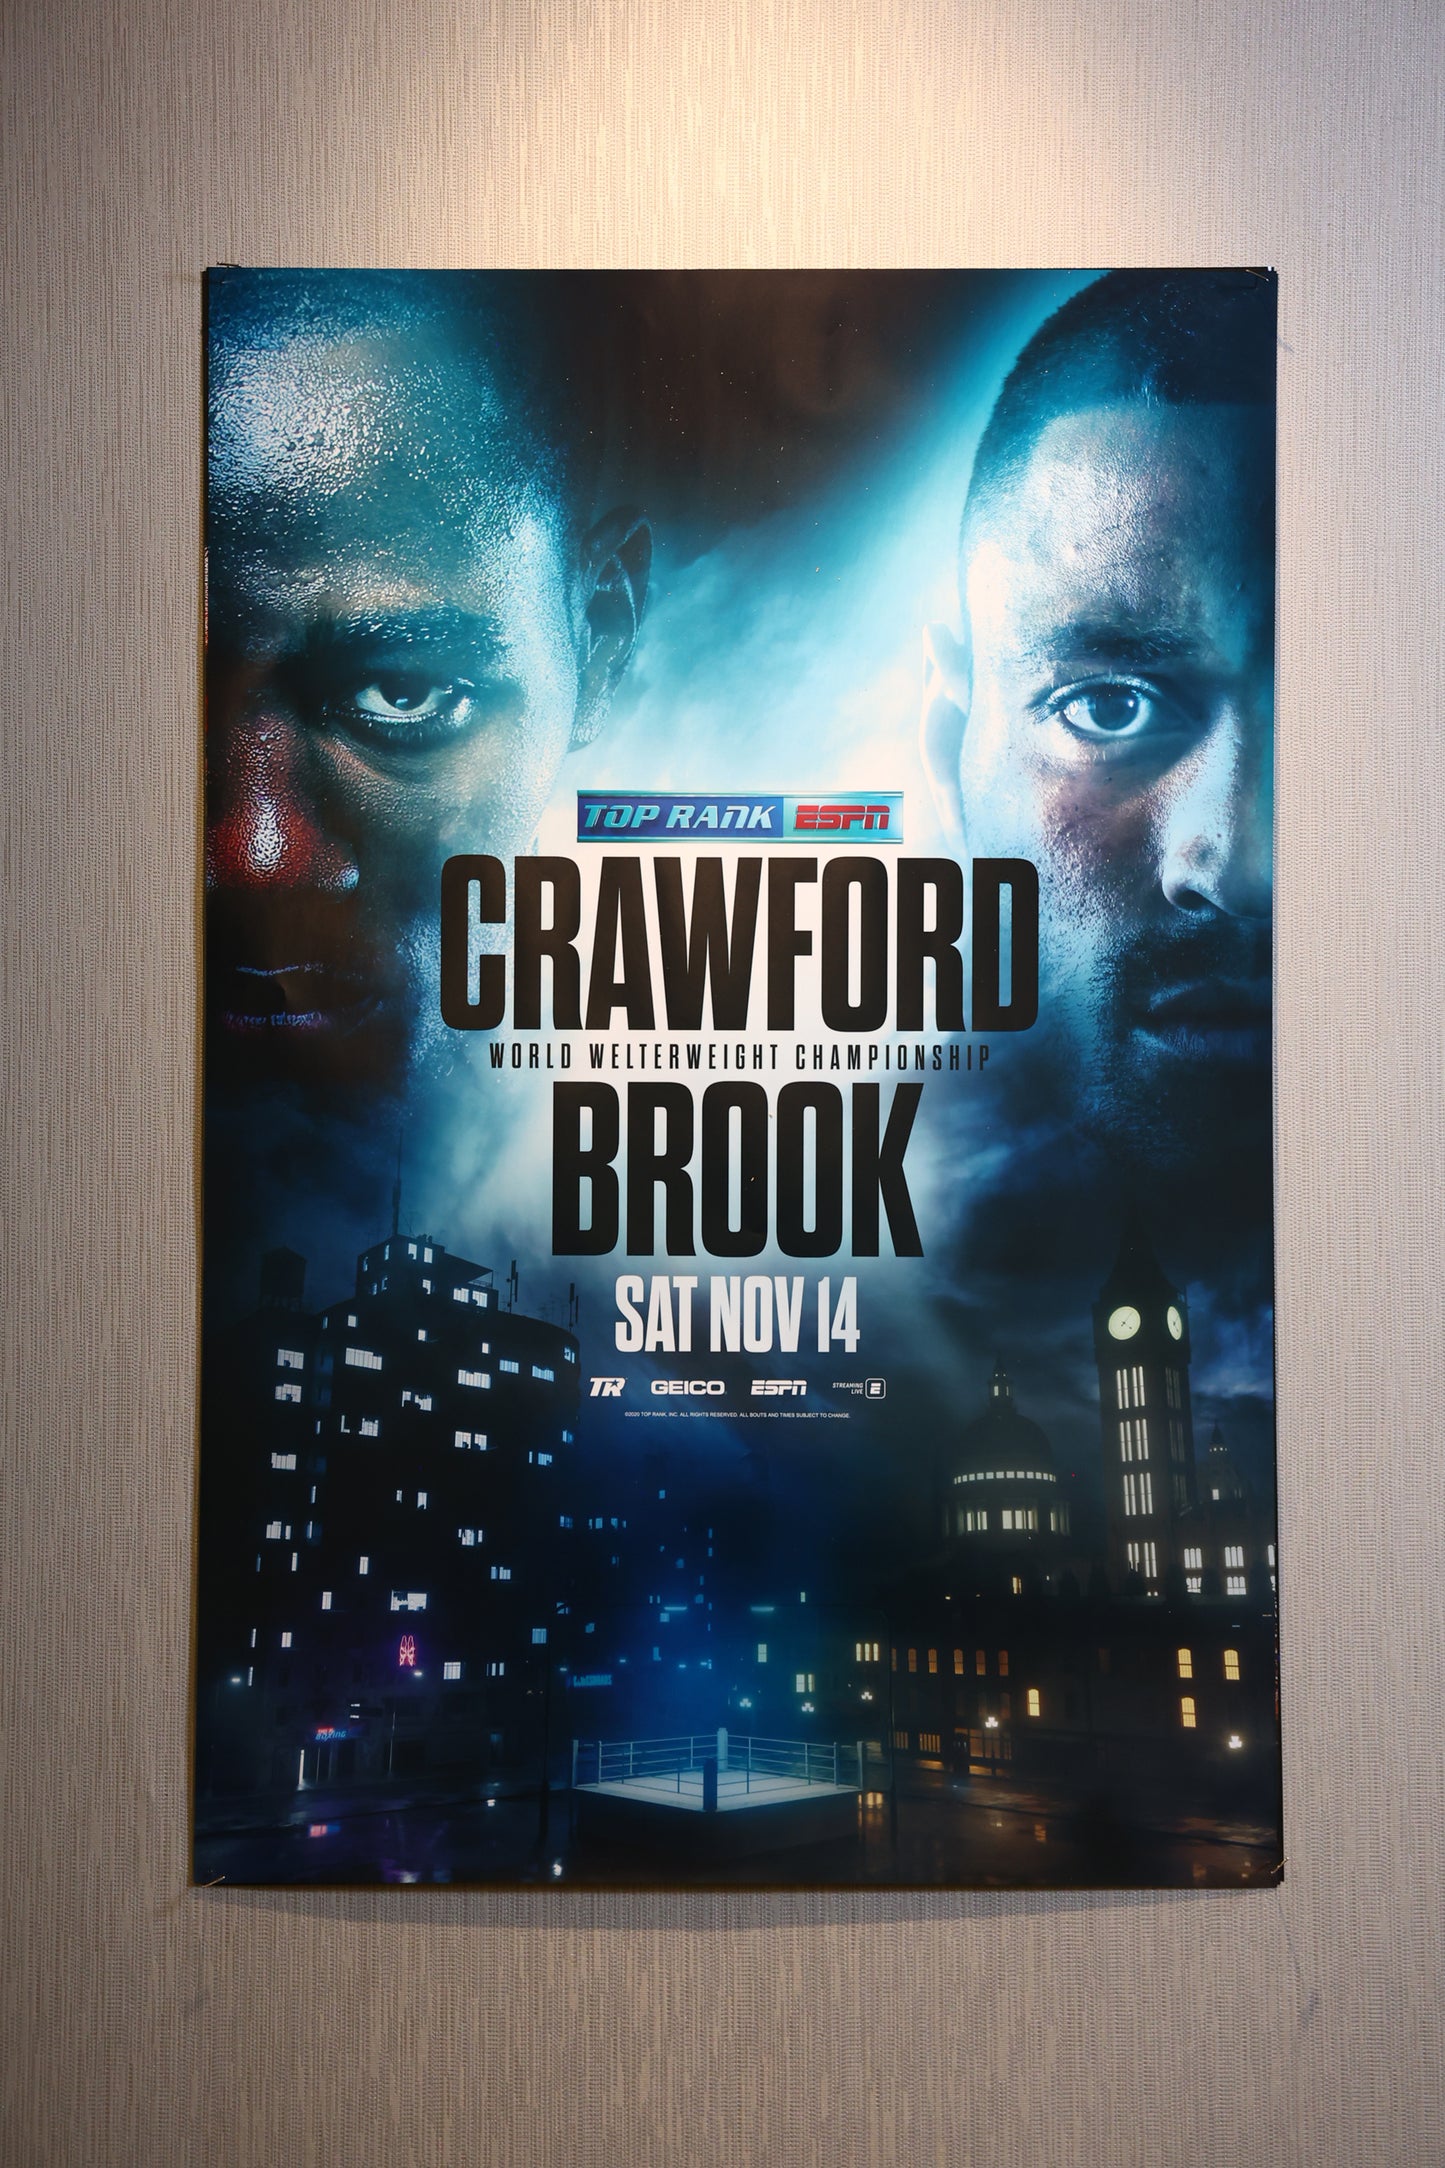 Terence Crawford vs. Kell Brook Official Event Poster (24x36)